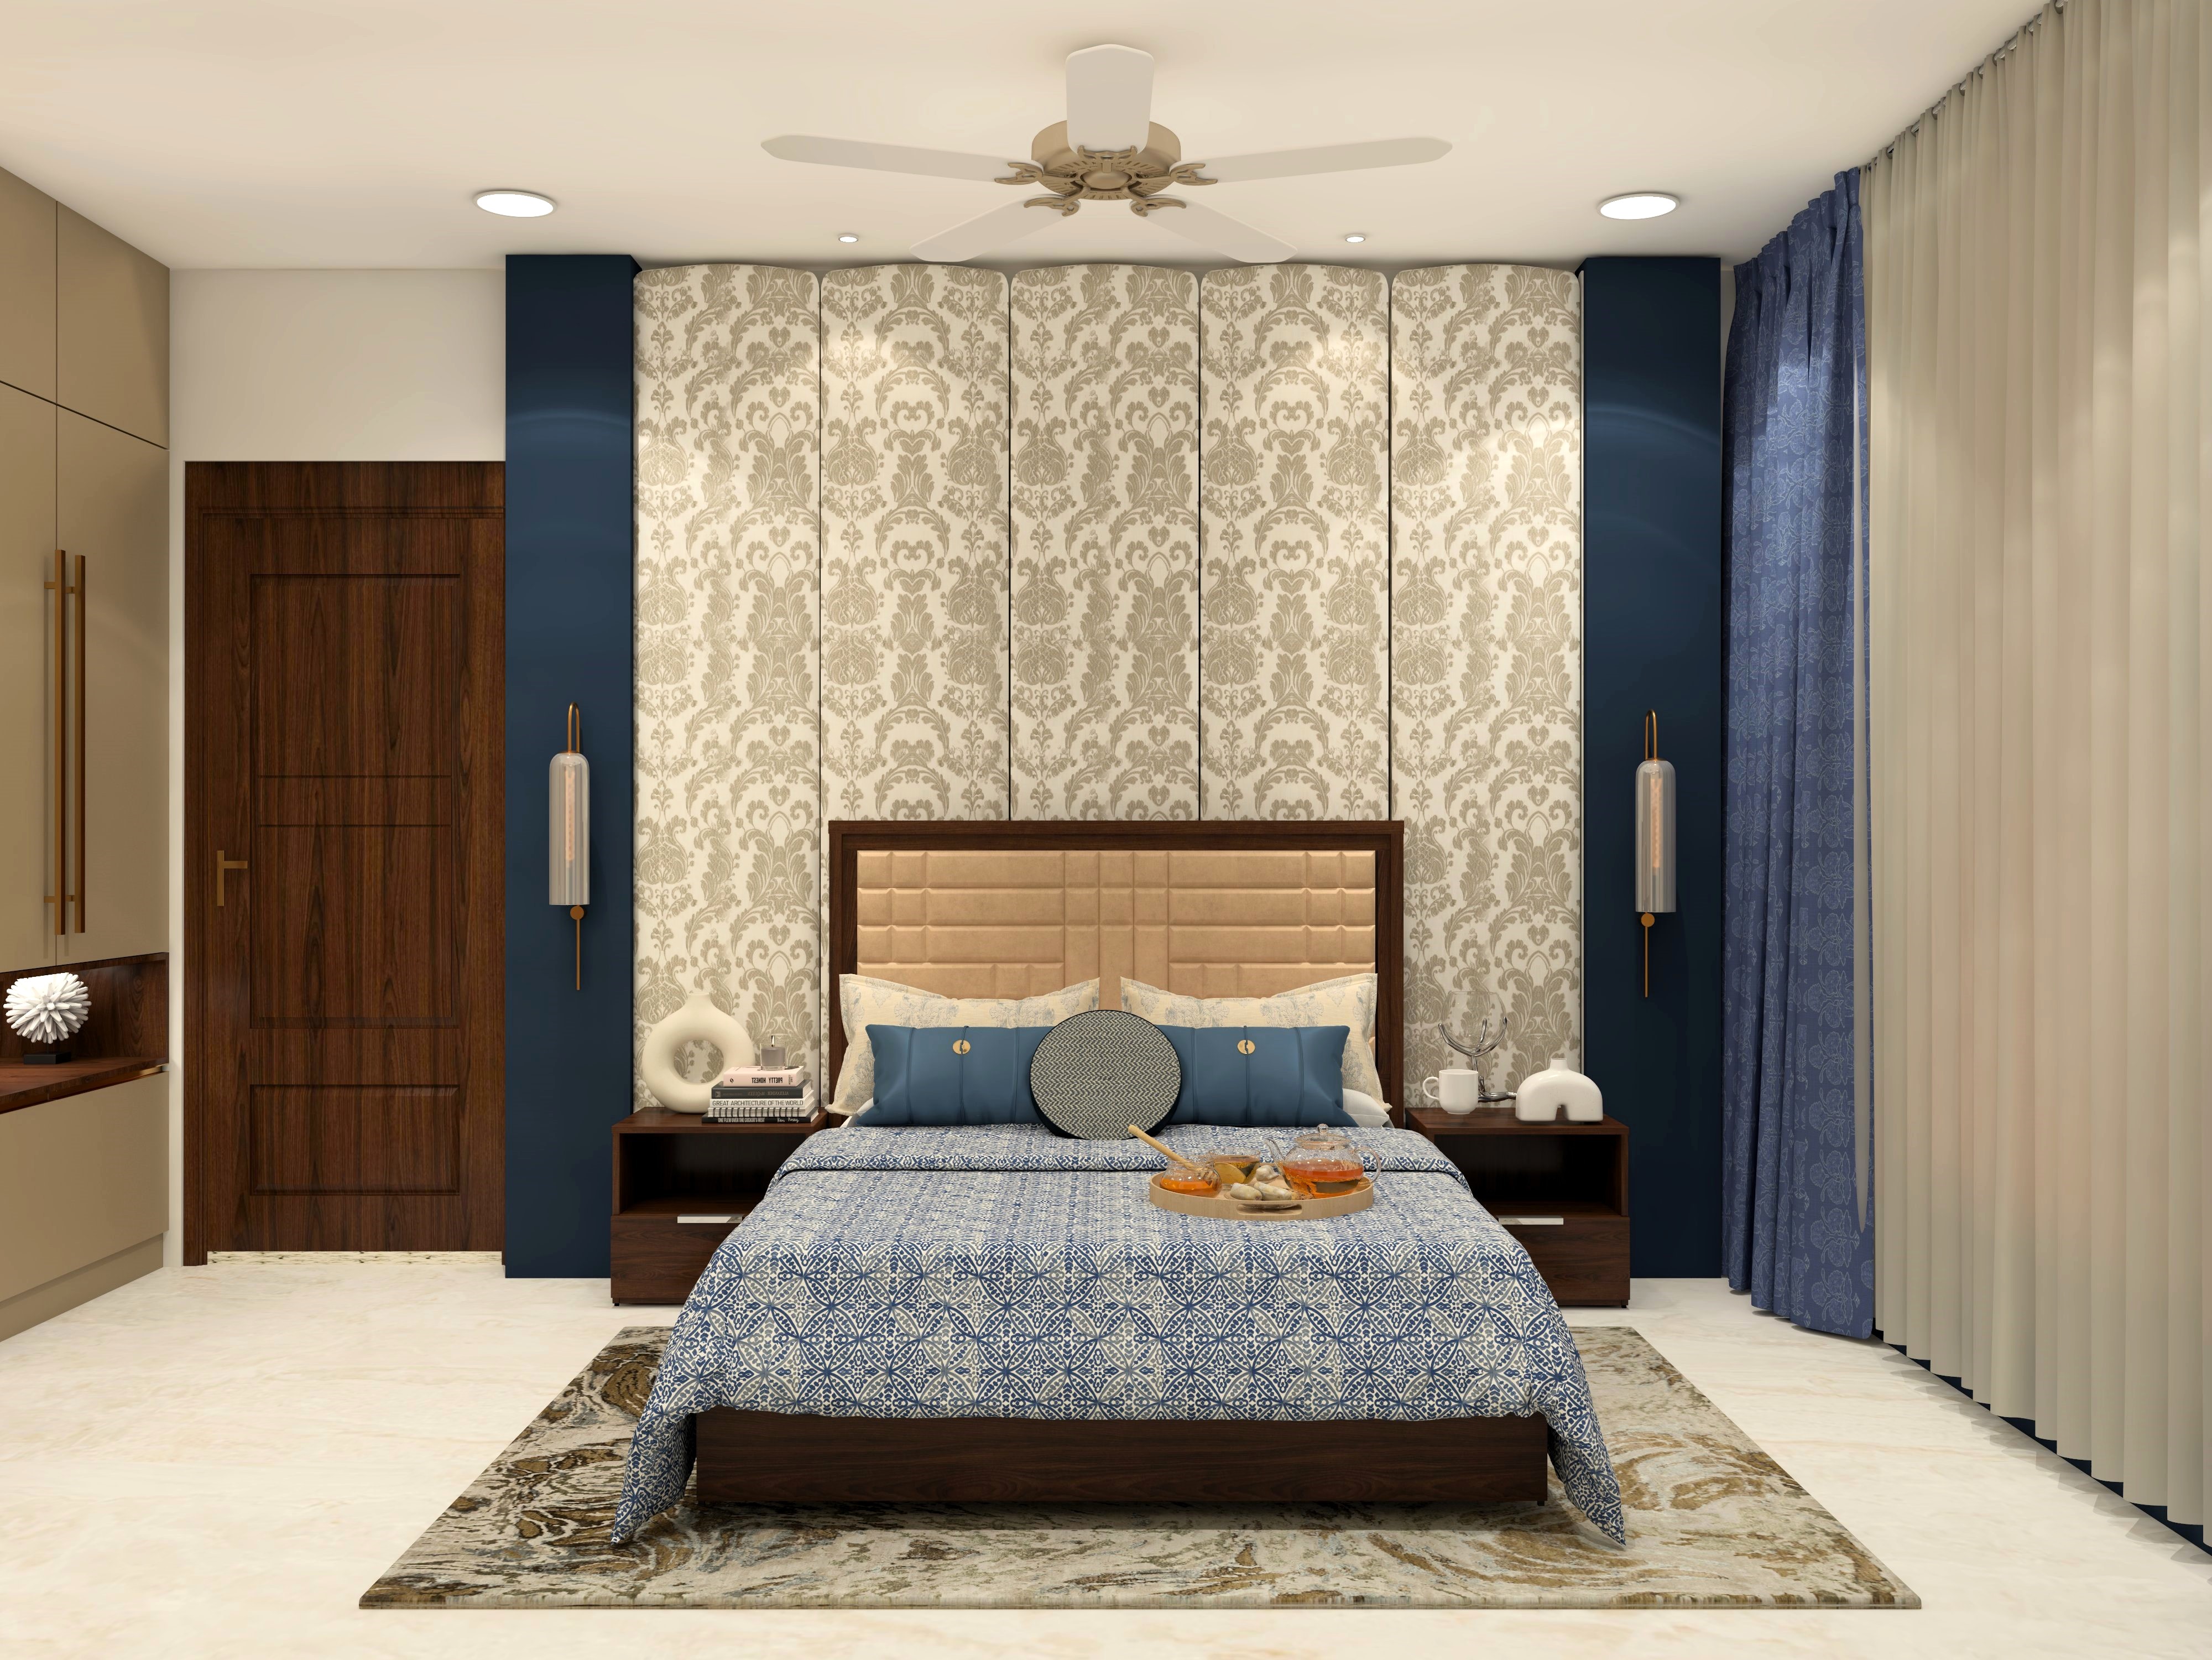 Traditional bedroom design with printed headboard and blue bedding-Beautiful Homes